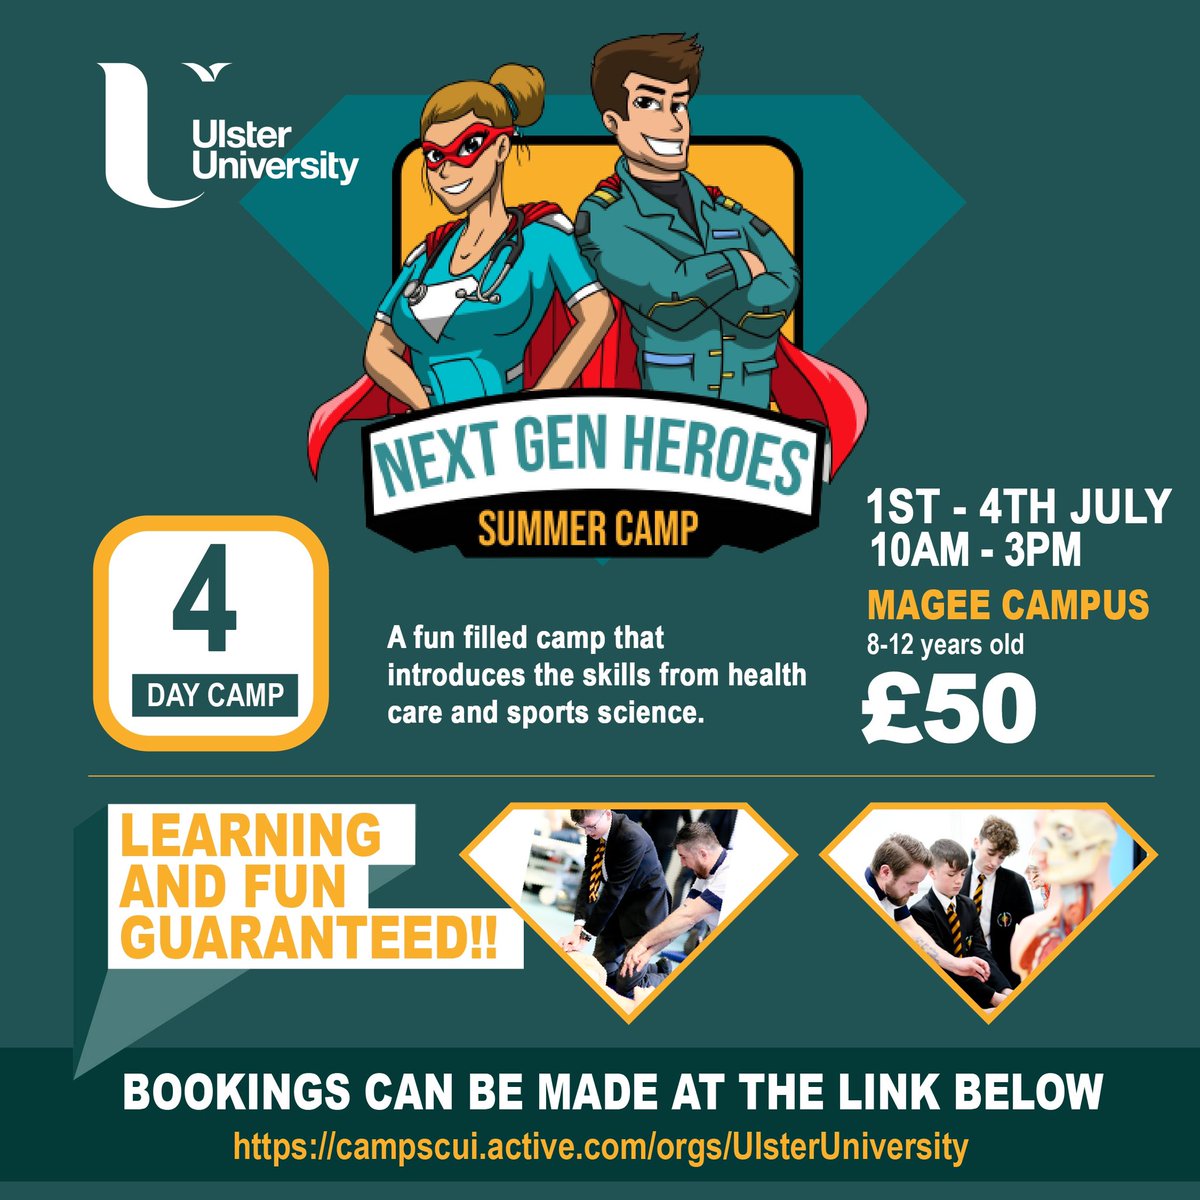 Are you interested in a summer camp for 8-12 year olds running from 1-4th July 24 (10am-3pm) in Ulster University Derry/Londonderry campus? We are calling all Next Gen Heroes!! You can book on this link campscui.active.com/orgs/UlsterUni…